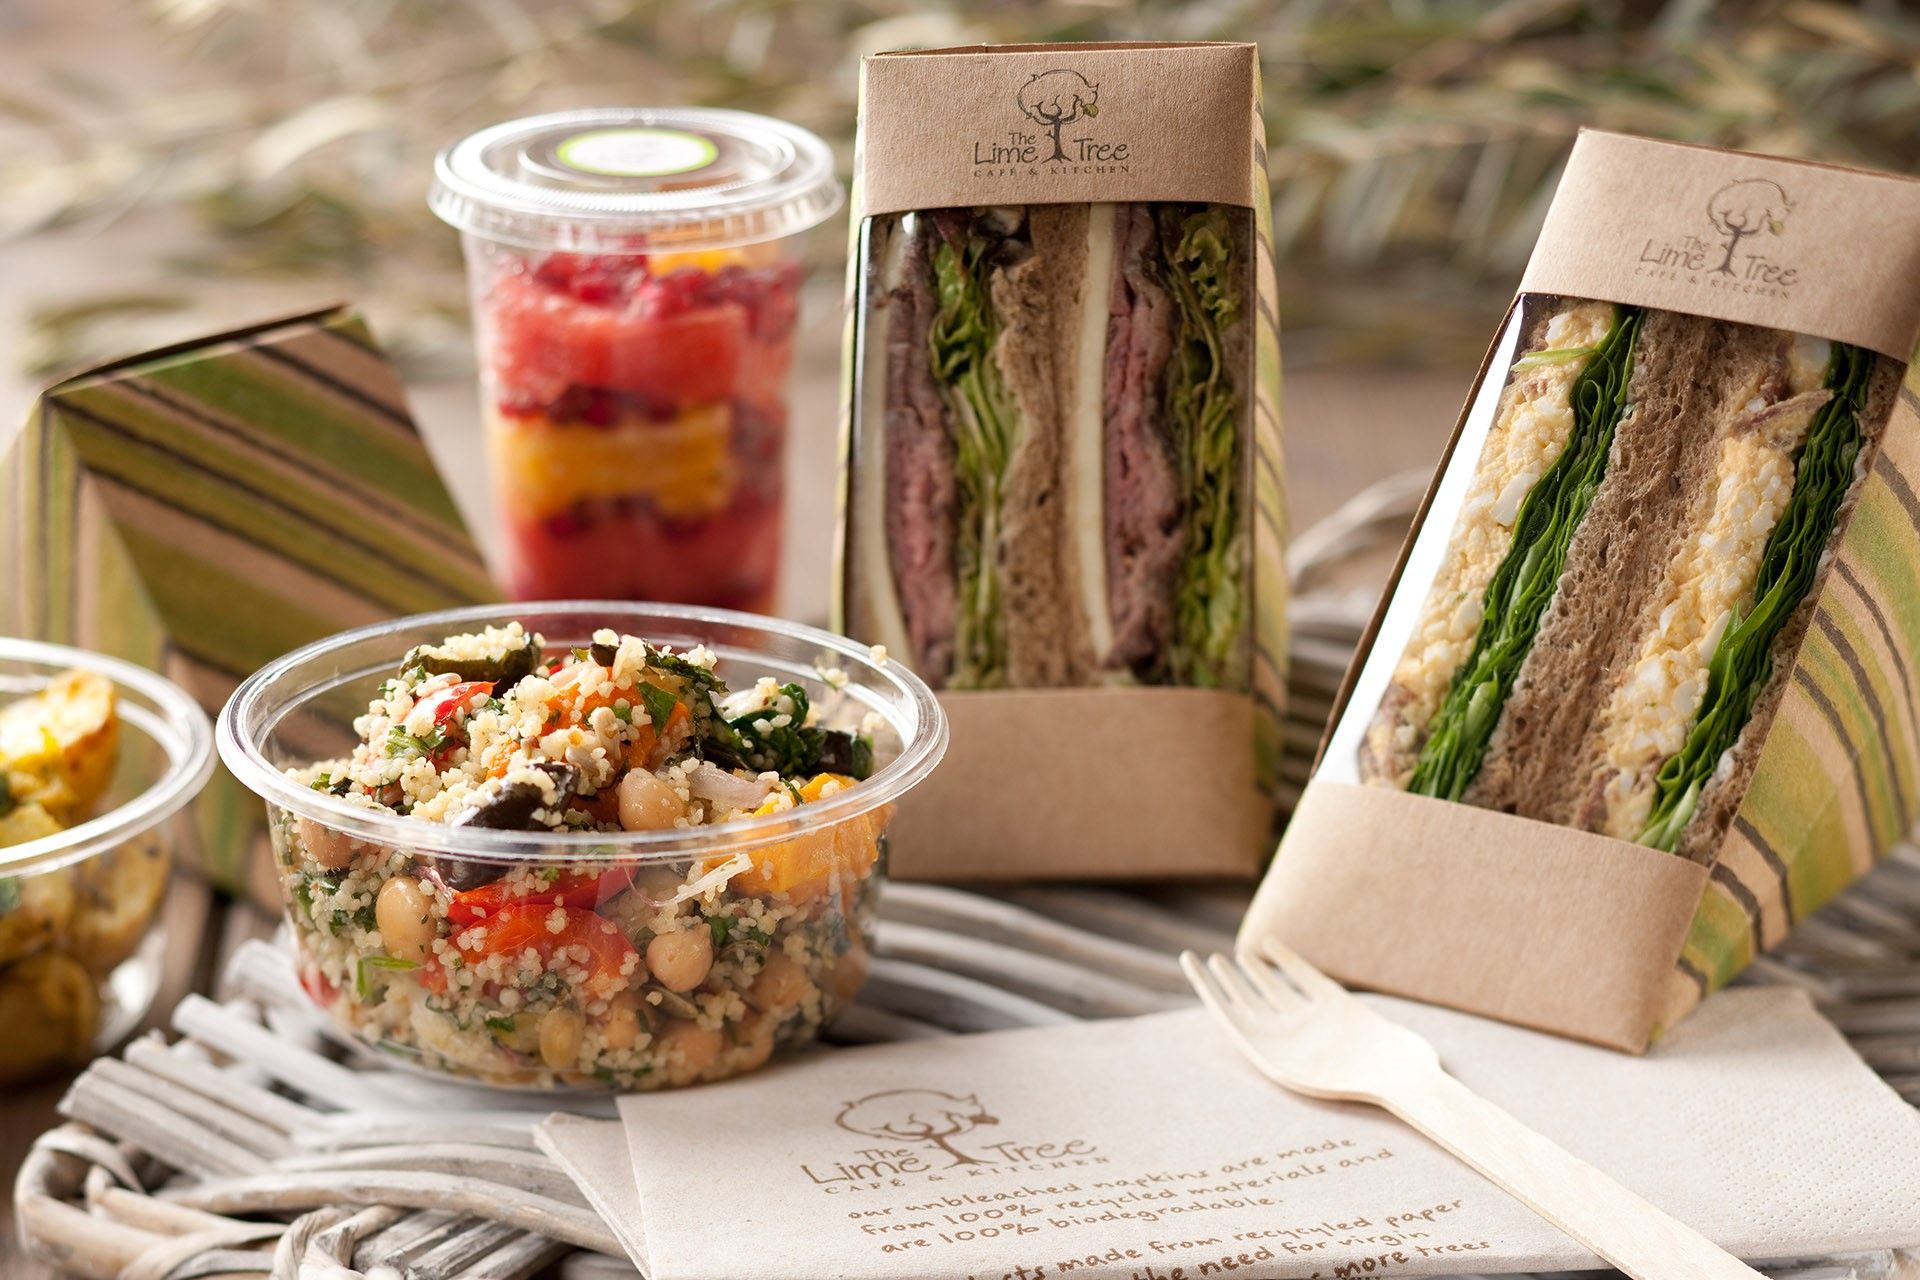 Lime Tree Café favourites now available at Ibn Battuta Gate offices